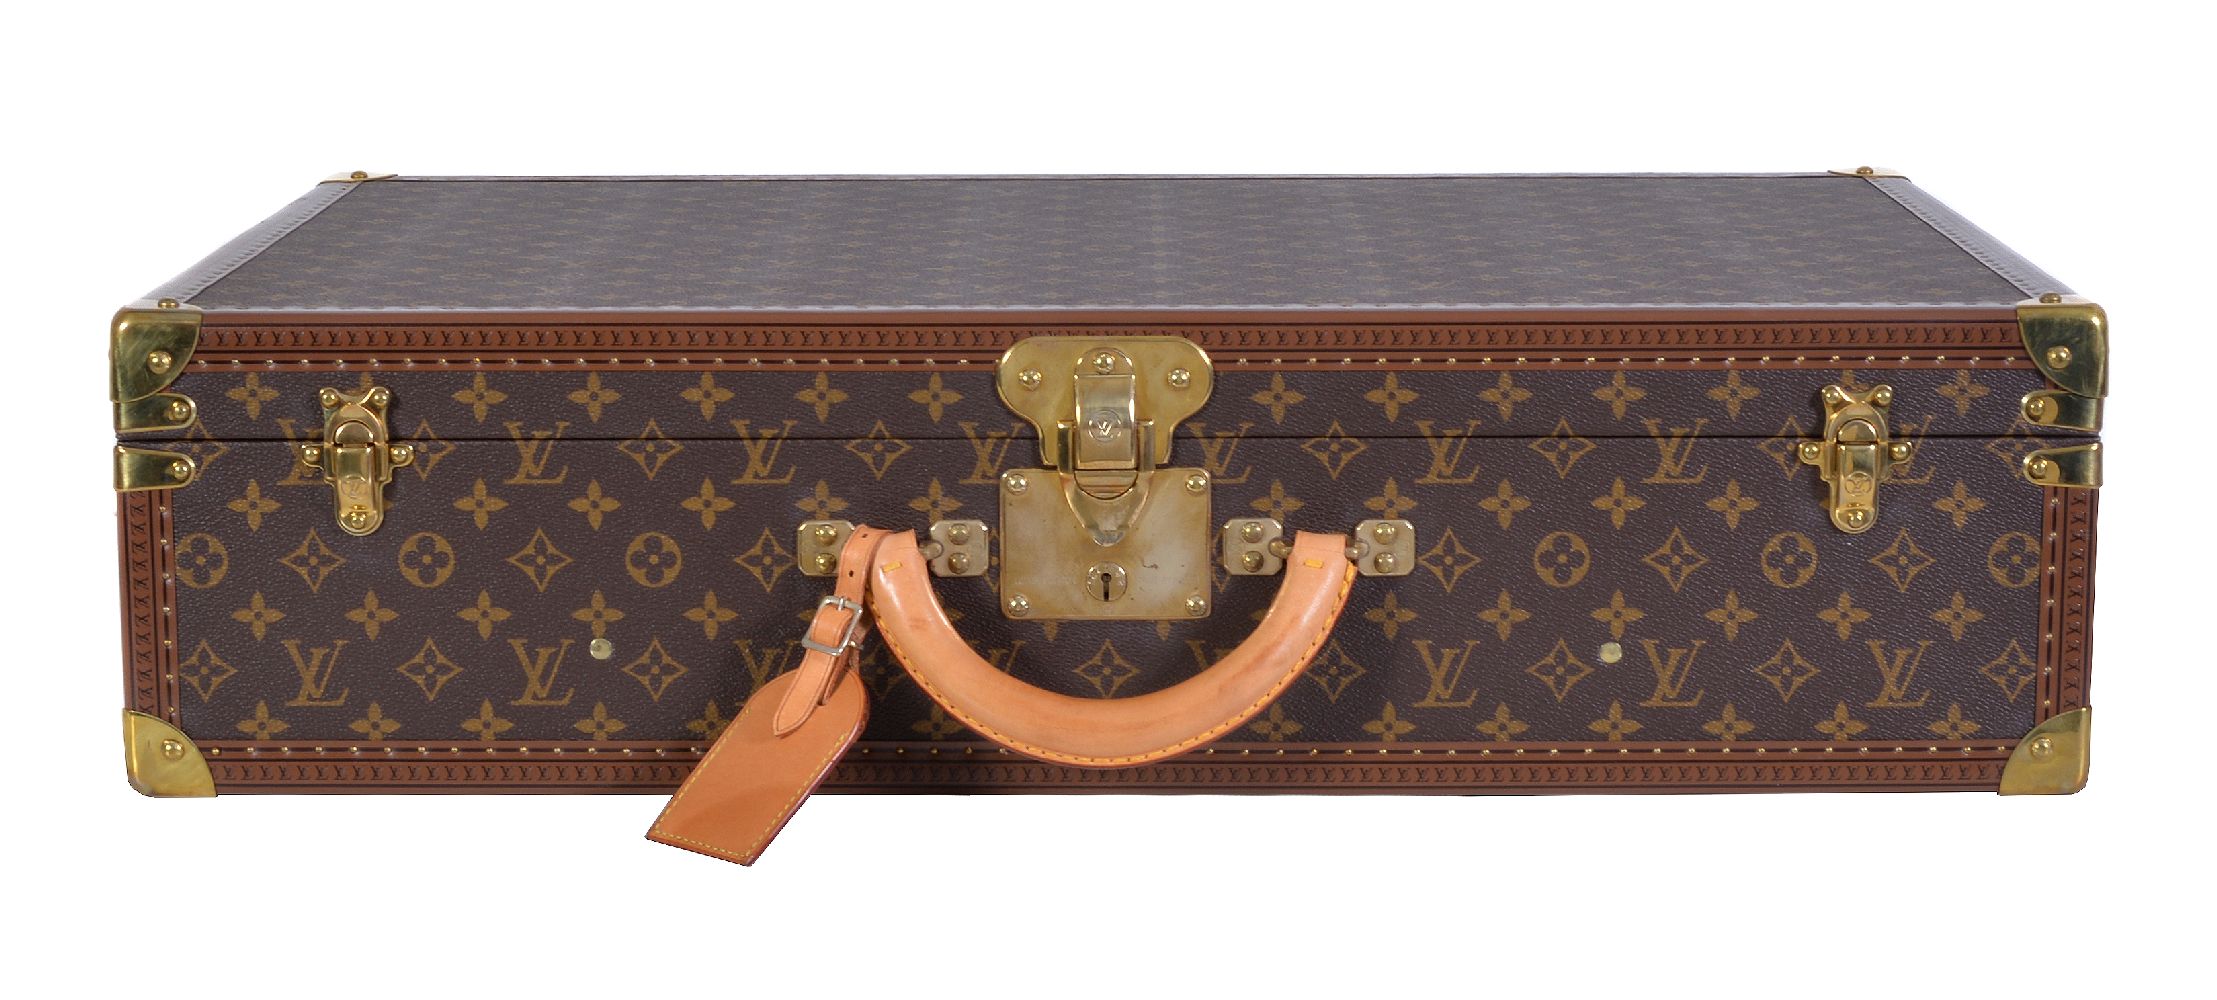 Louis Vuitton, Monogram, Bisten 70, a coated canvas and leather hard suitcase - Image 2 of 7